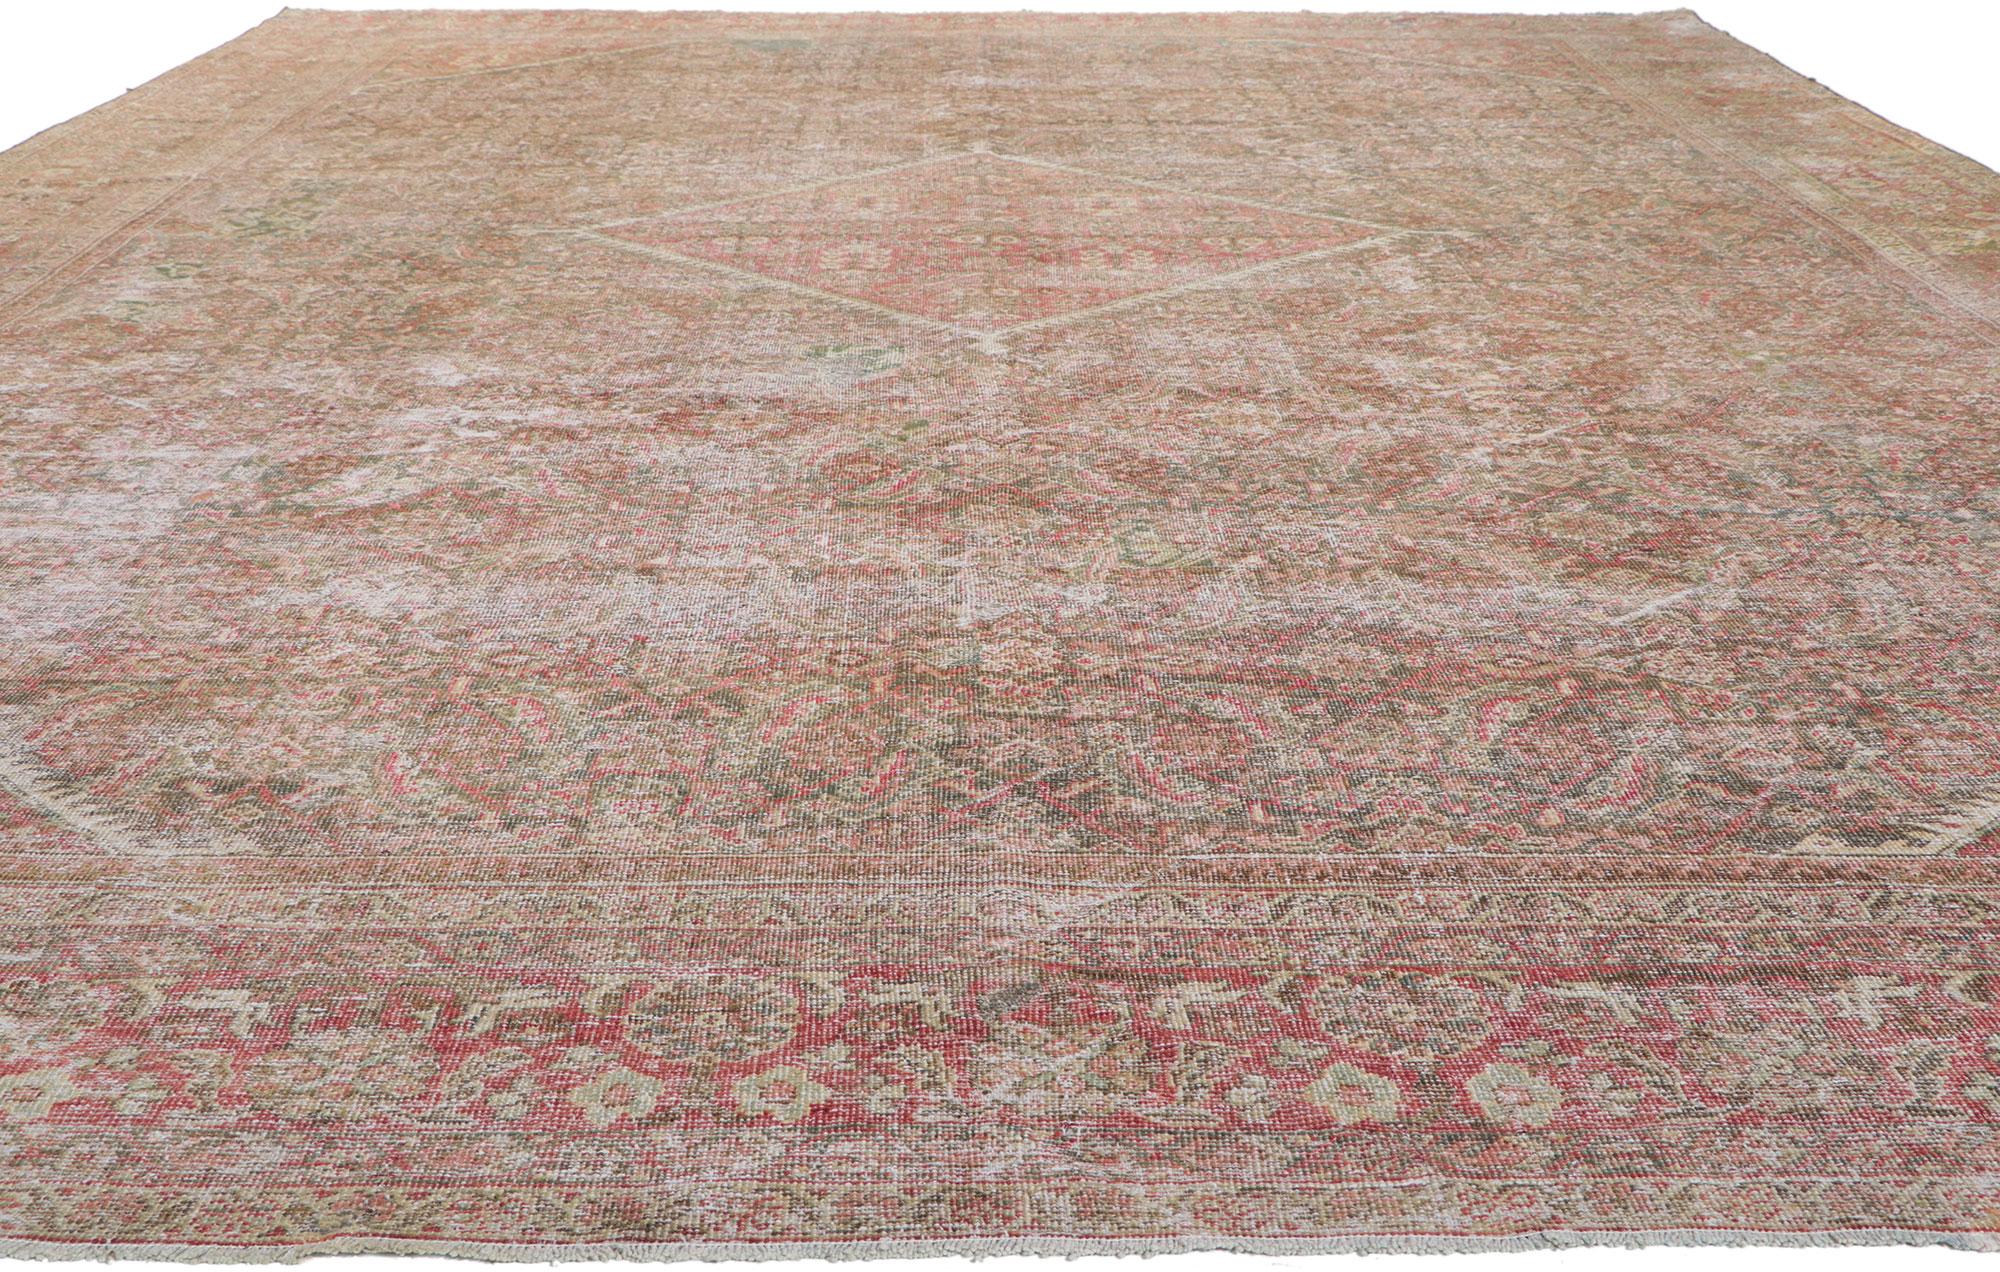 Rustic Distressed Antique Persian Mahal Rug For Sale